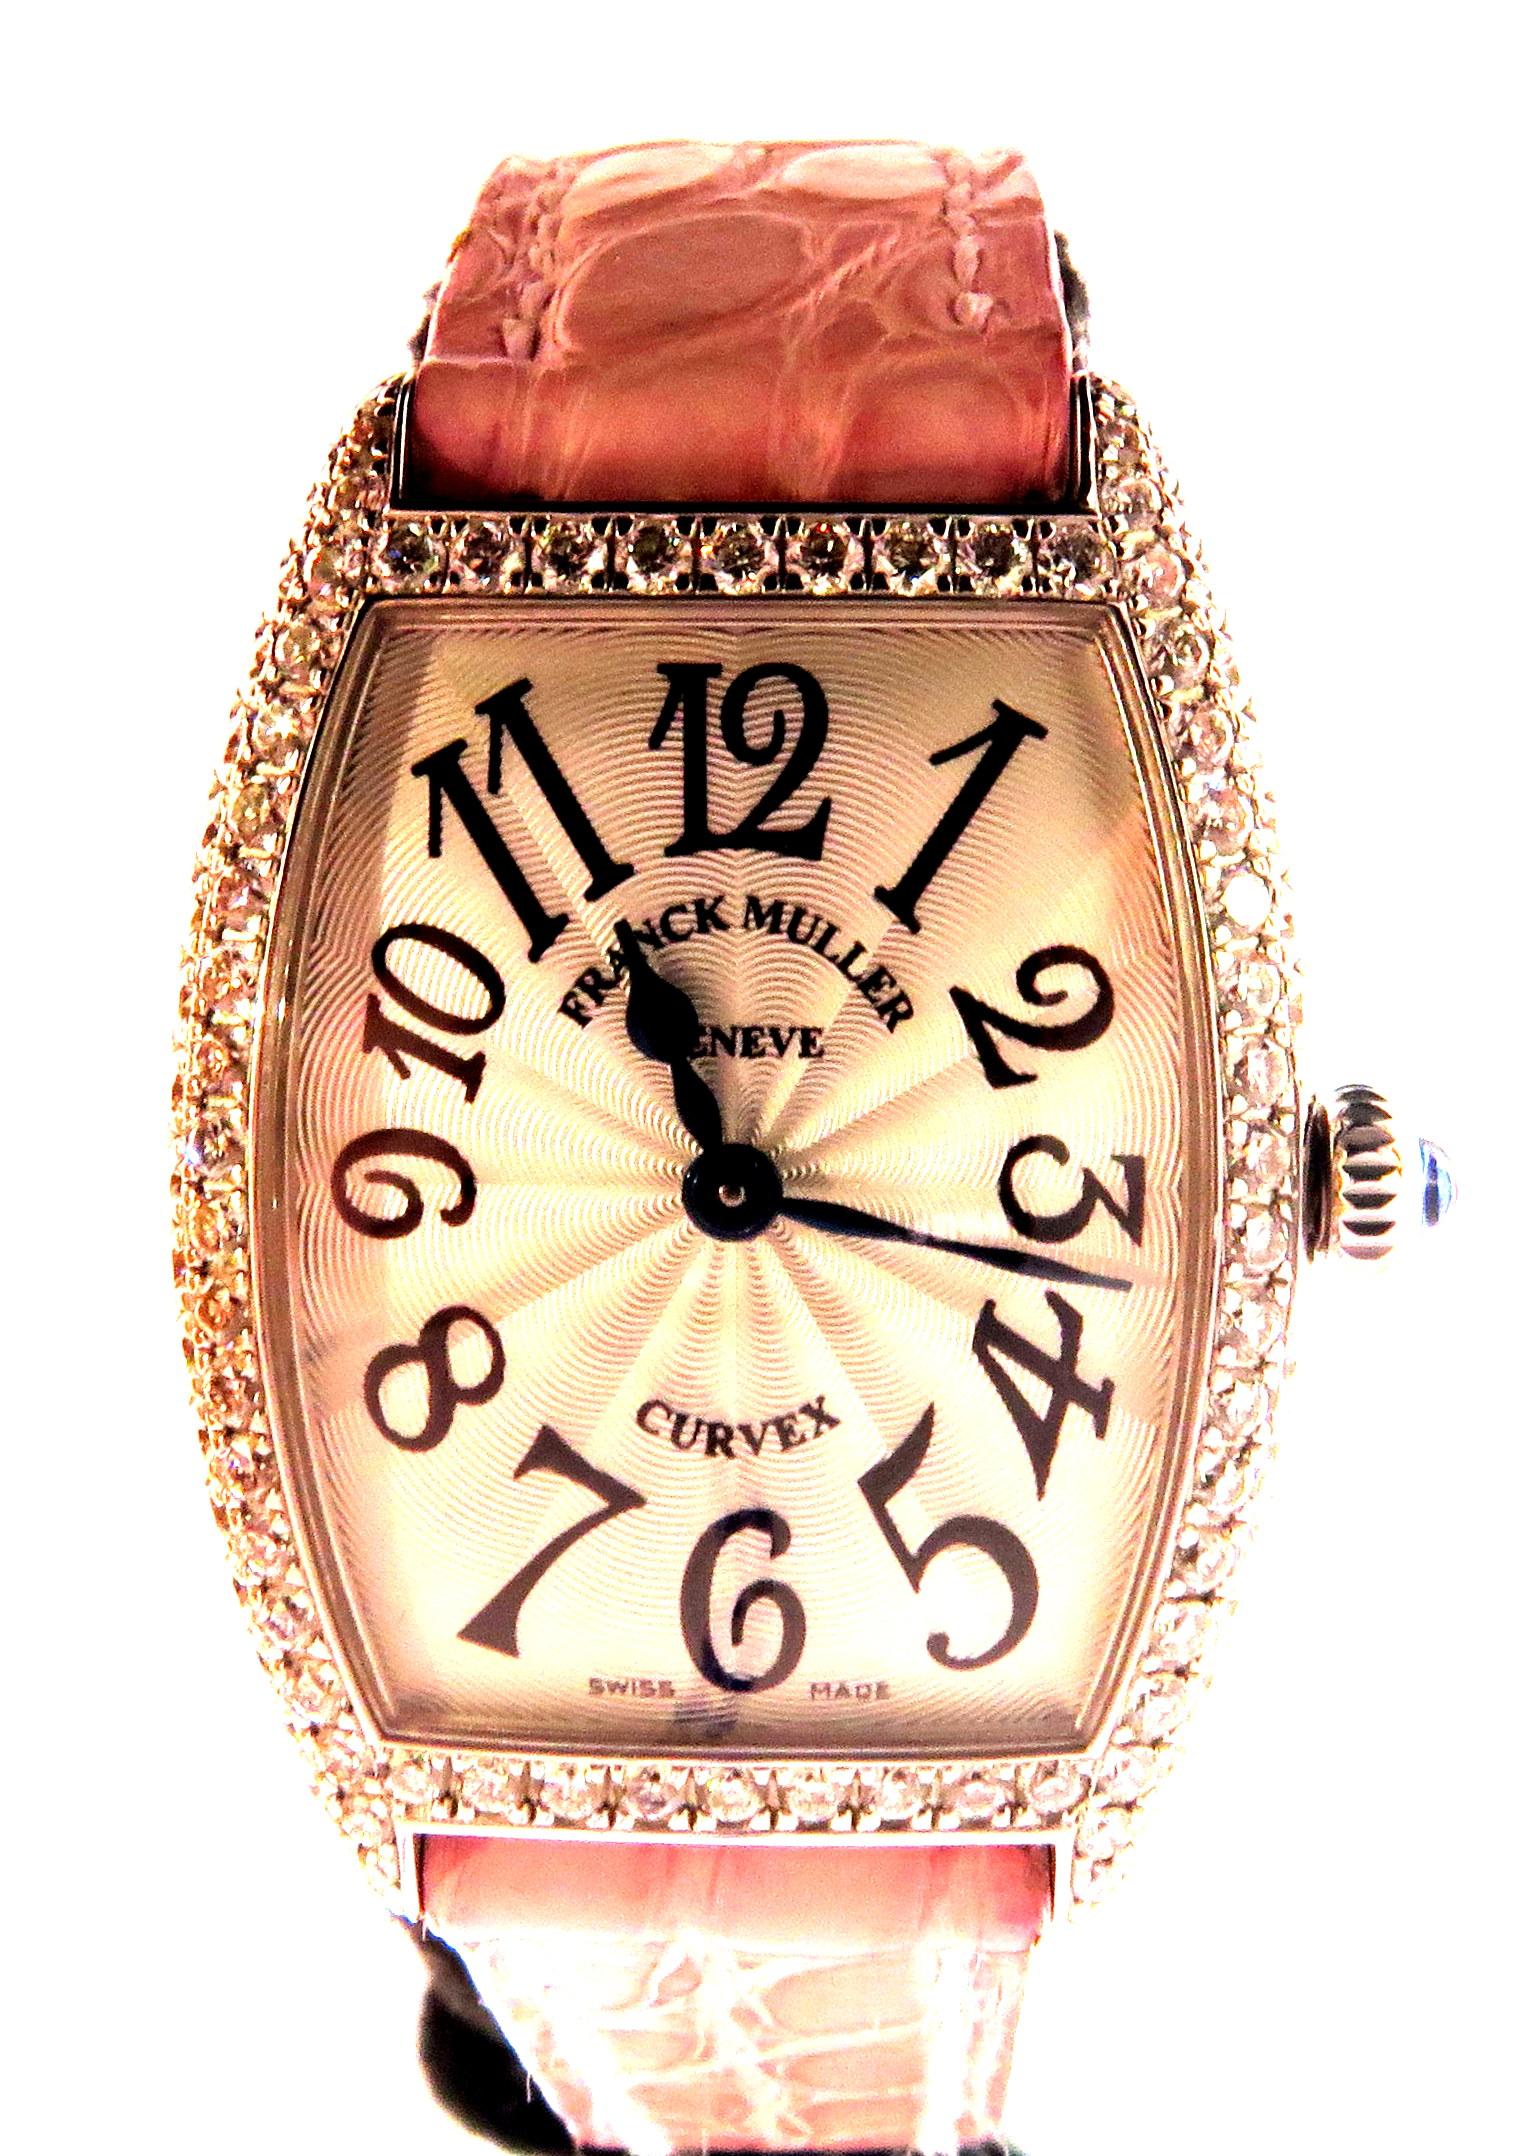 This is a 18k white gold Franck Muller quartz ladies watch with original diamonds on both the watch bezel & the clasp on the strap. This watch is pre owned & works perfectly. This watch has the original Franck Muller band which is still in very good